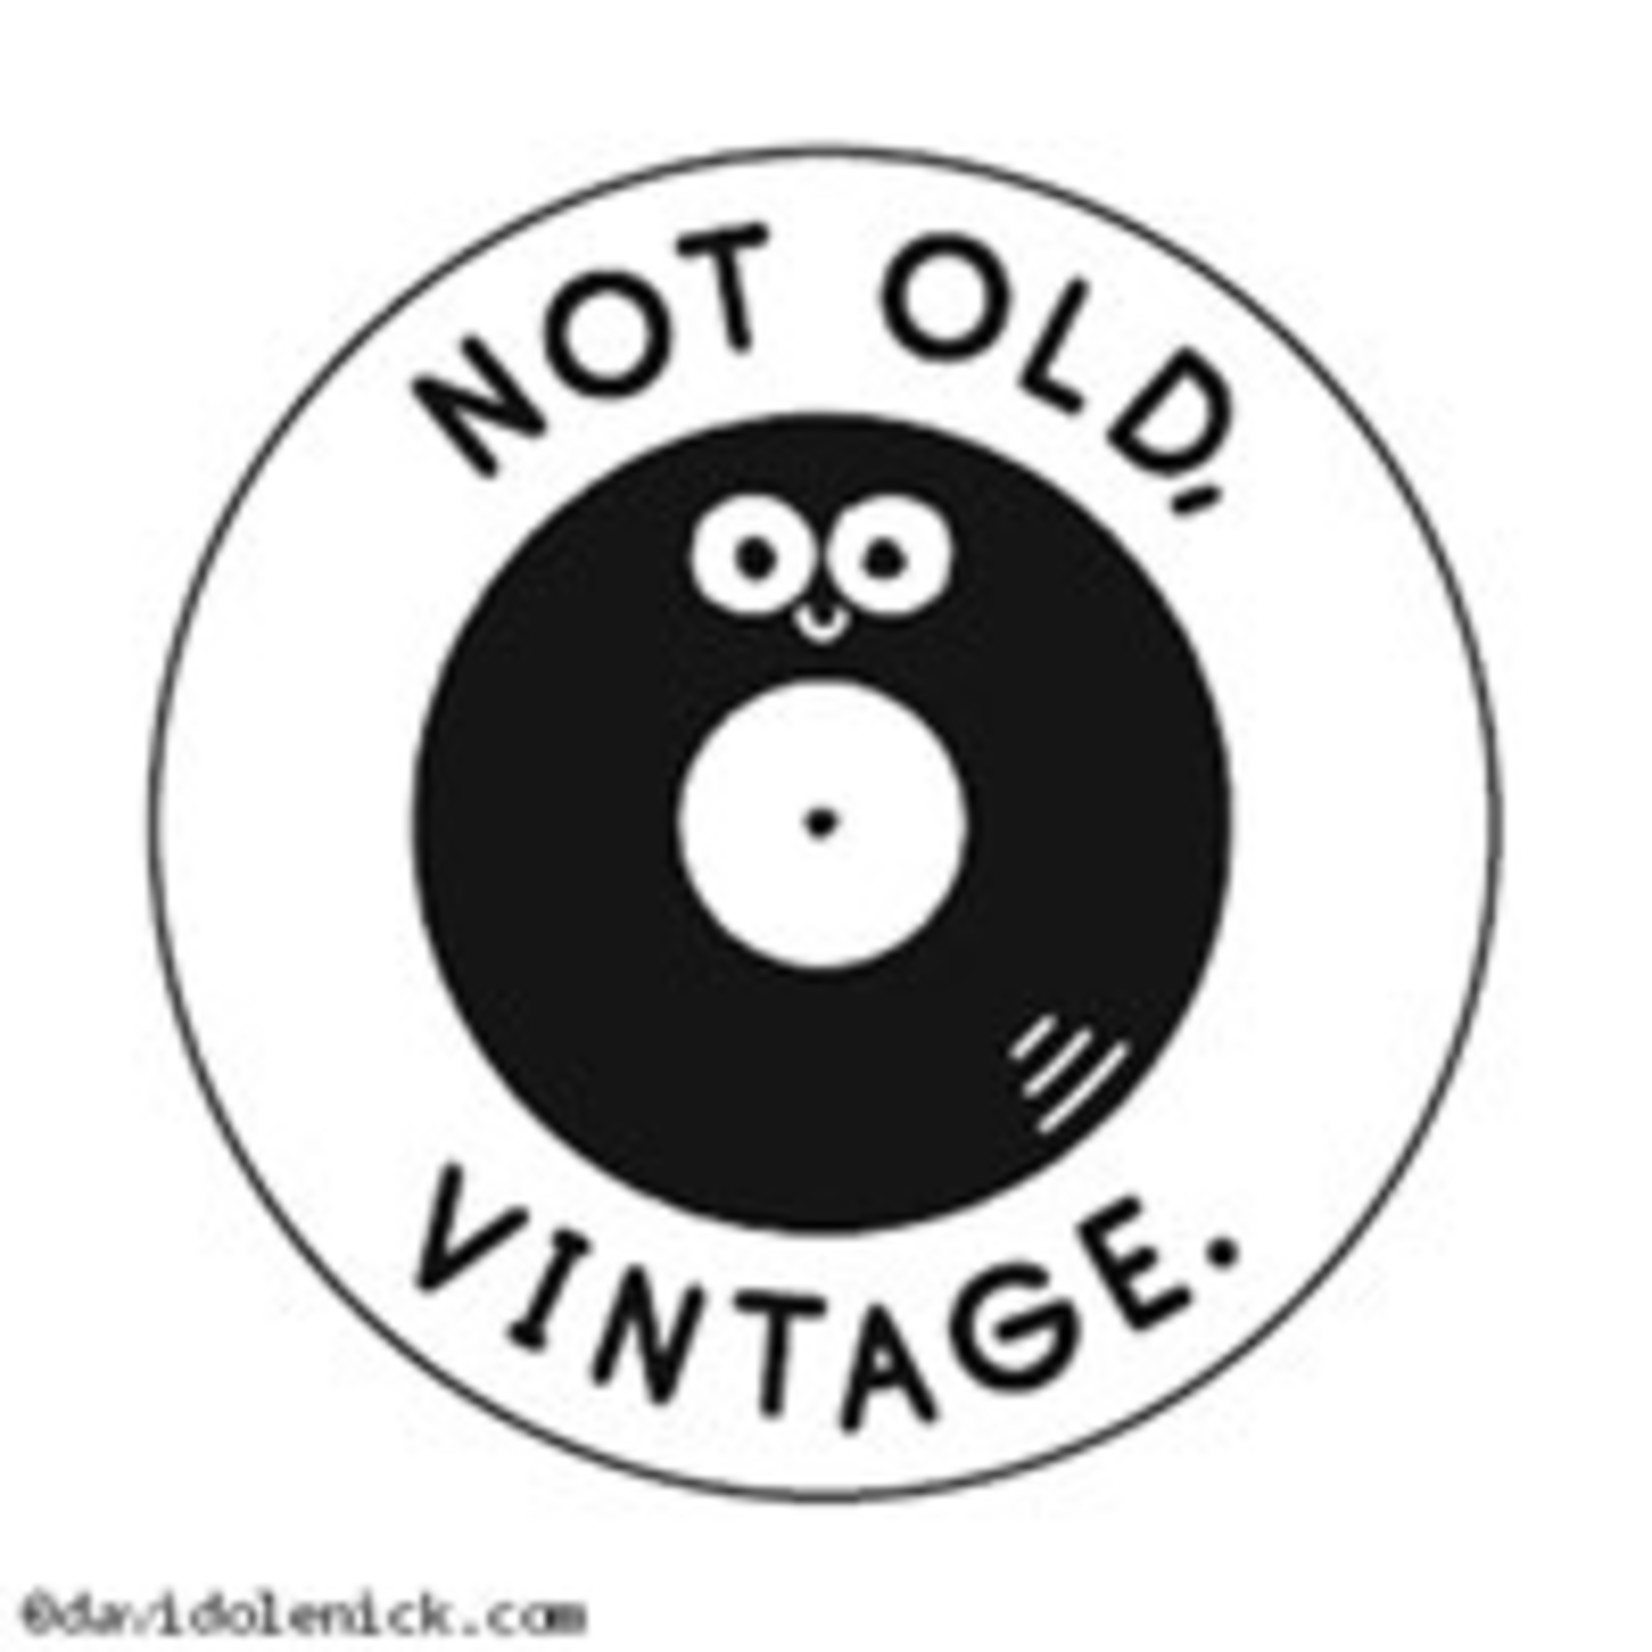 Button - Not Old, Vintage.